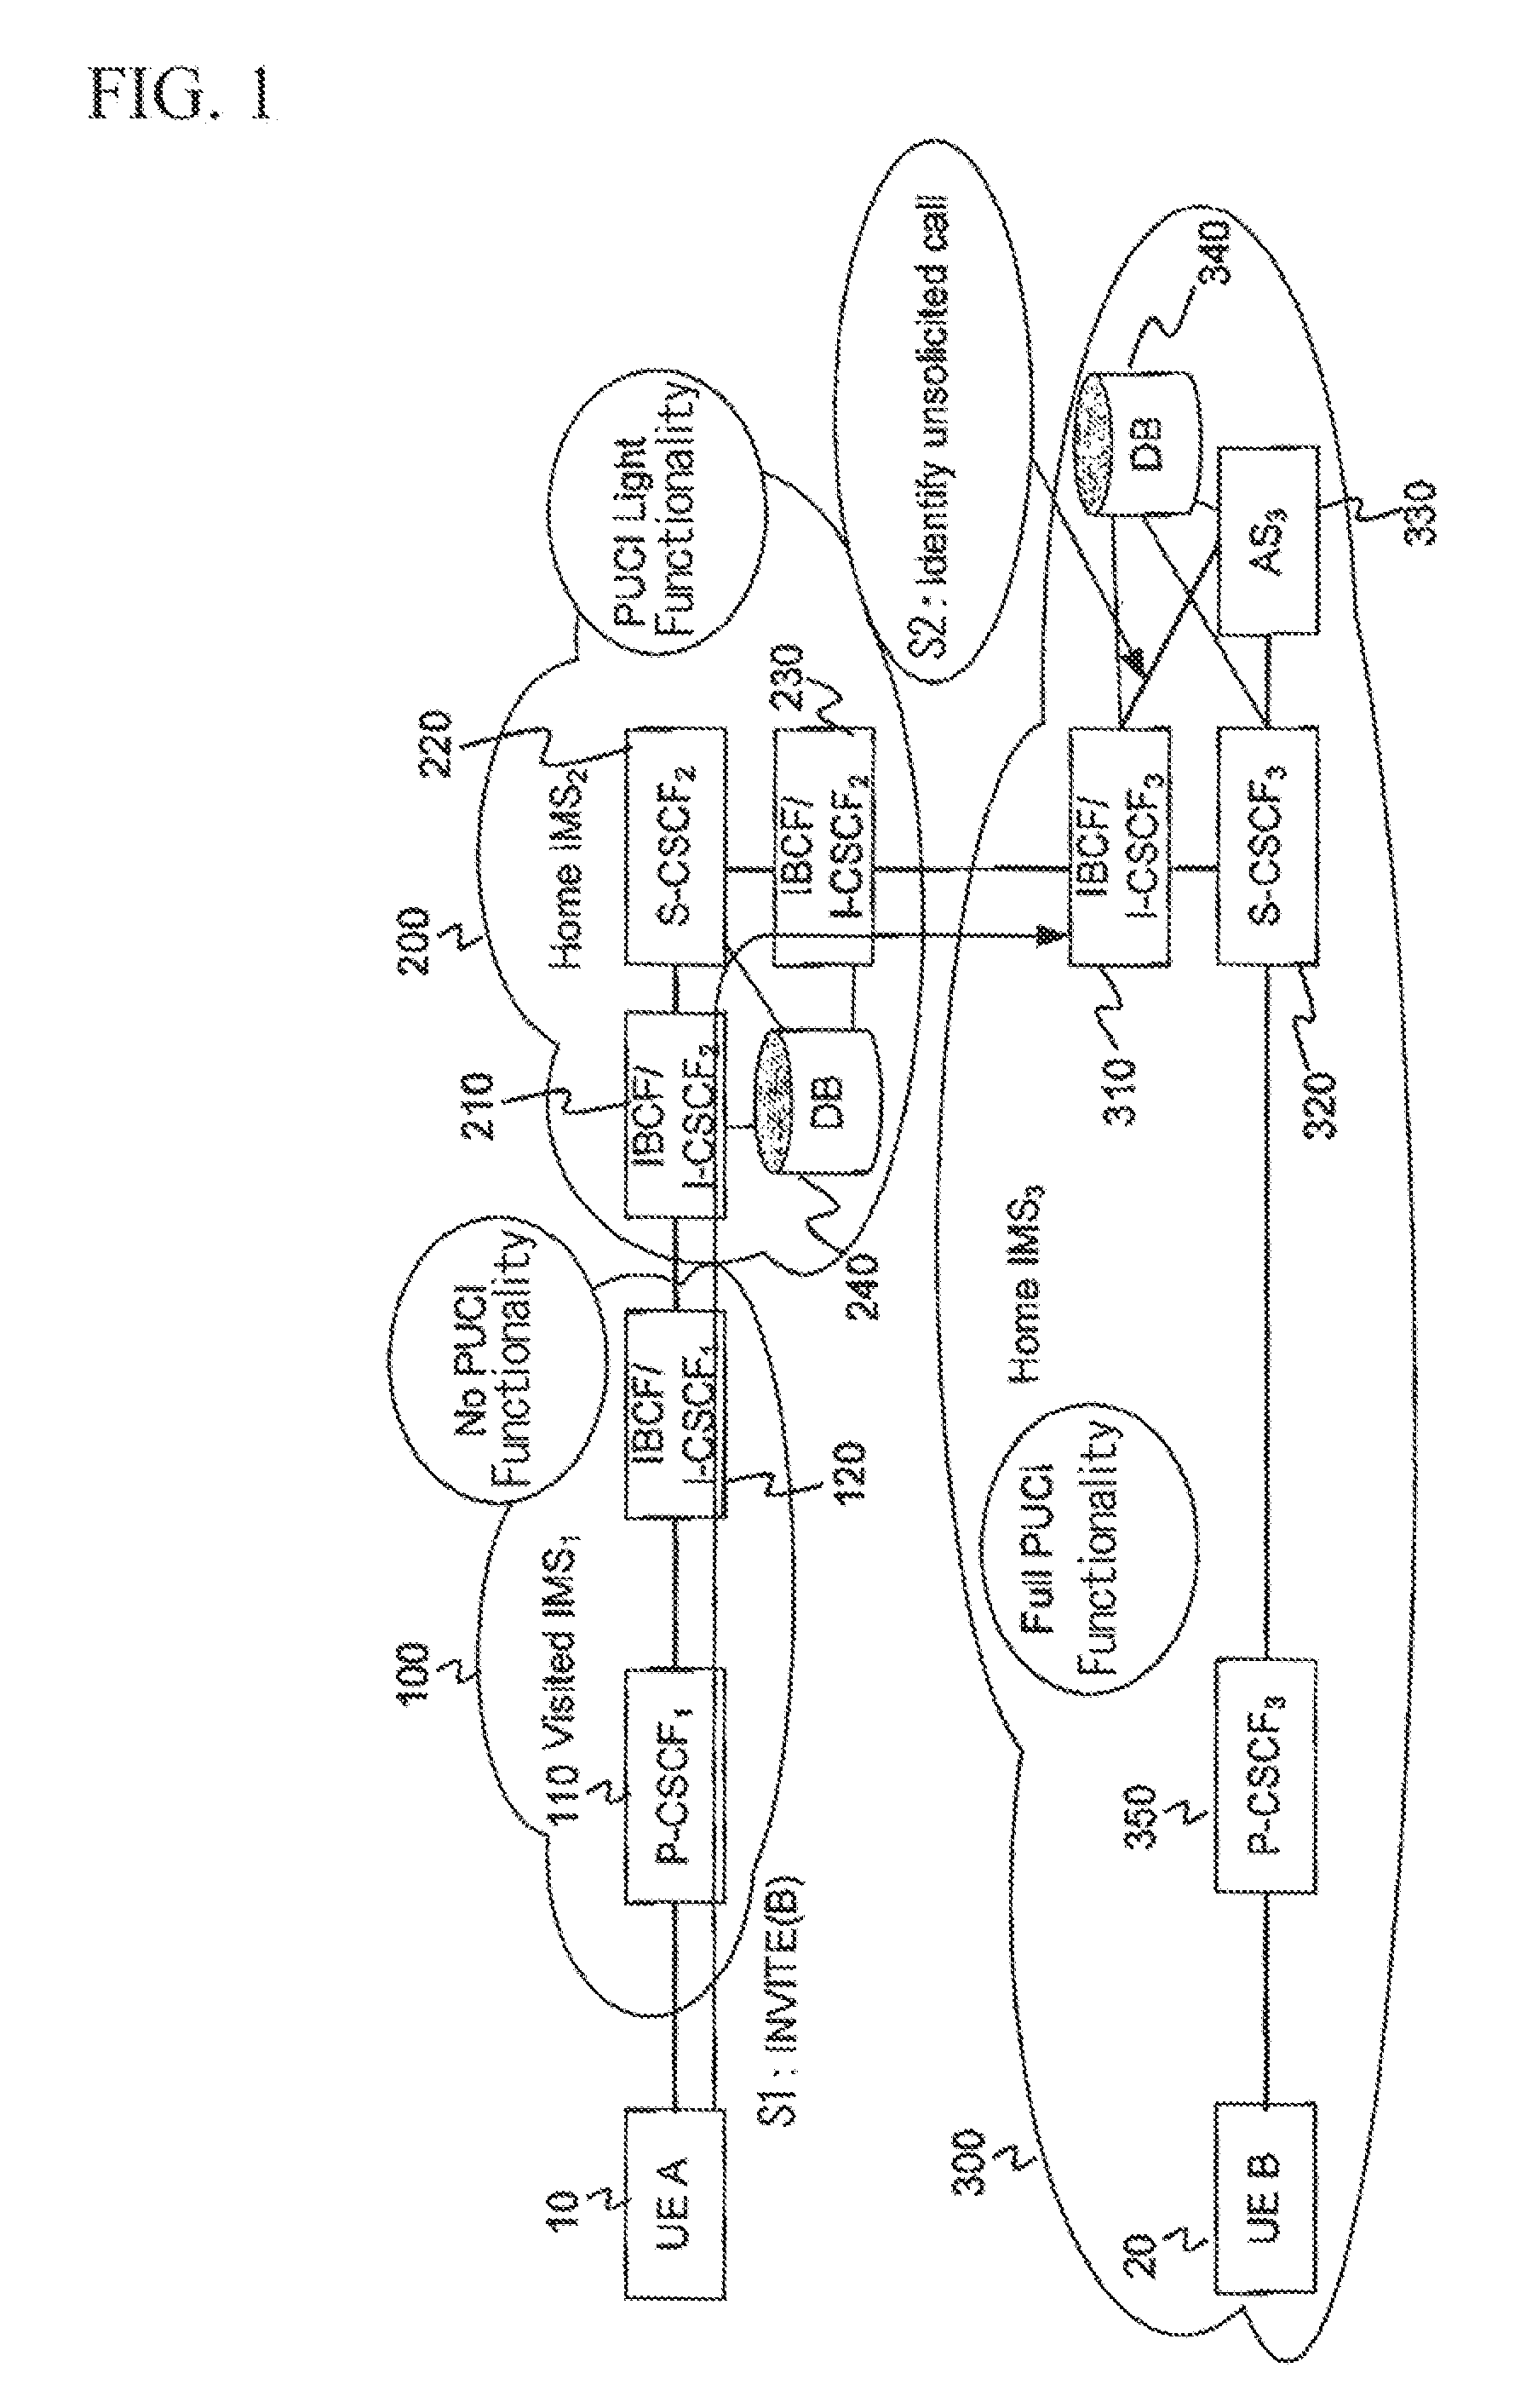 Protection against unsolicited communication for internet protocol multimedia subsystem